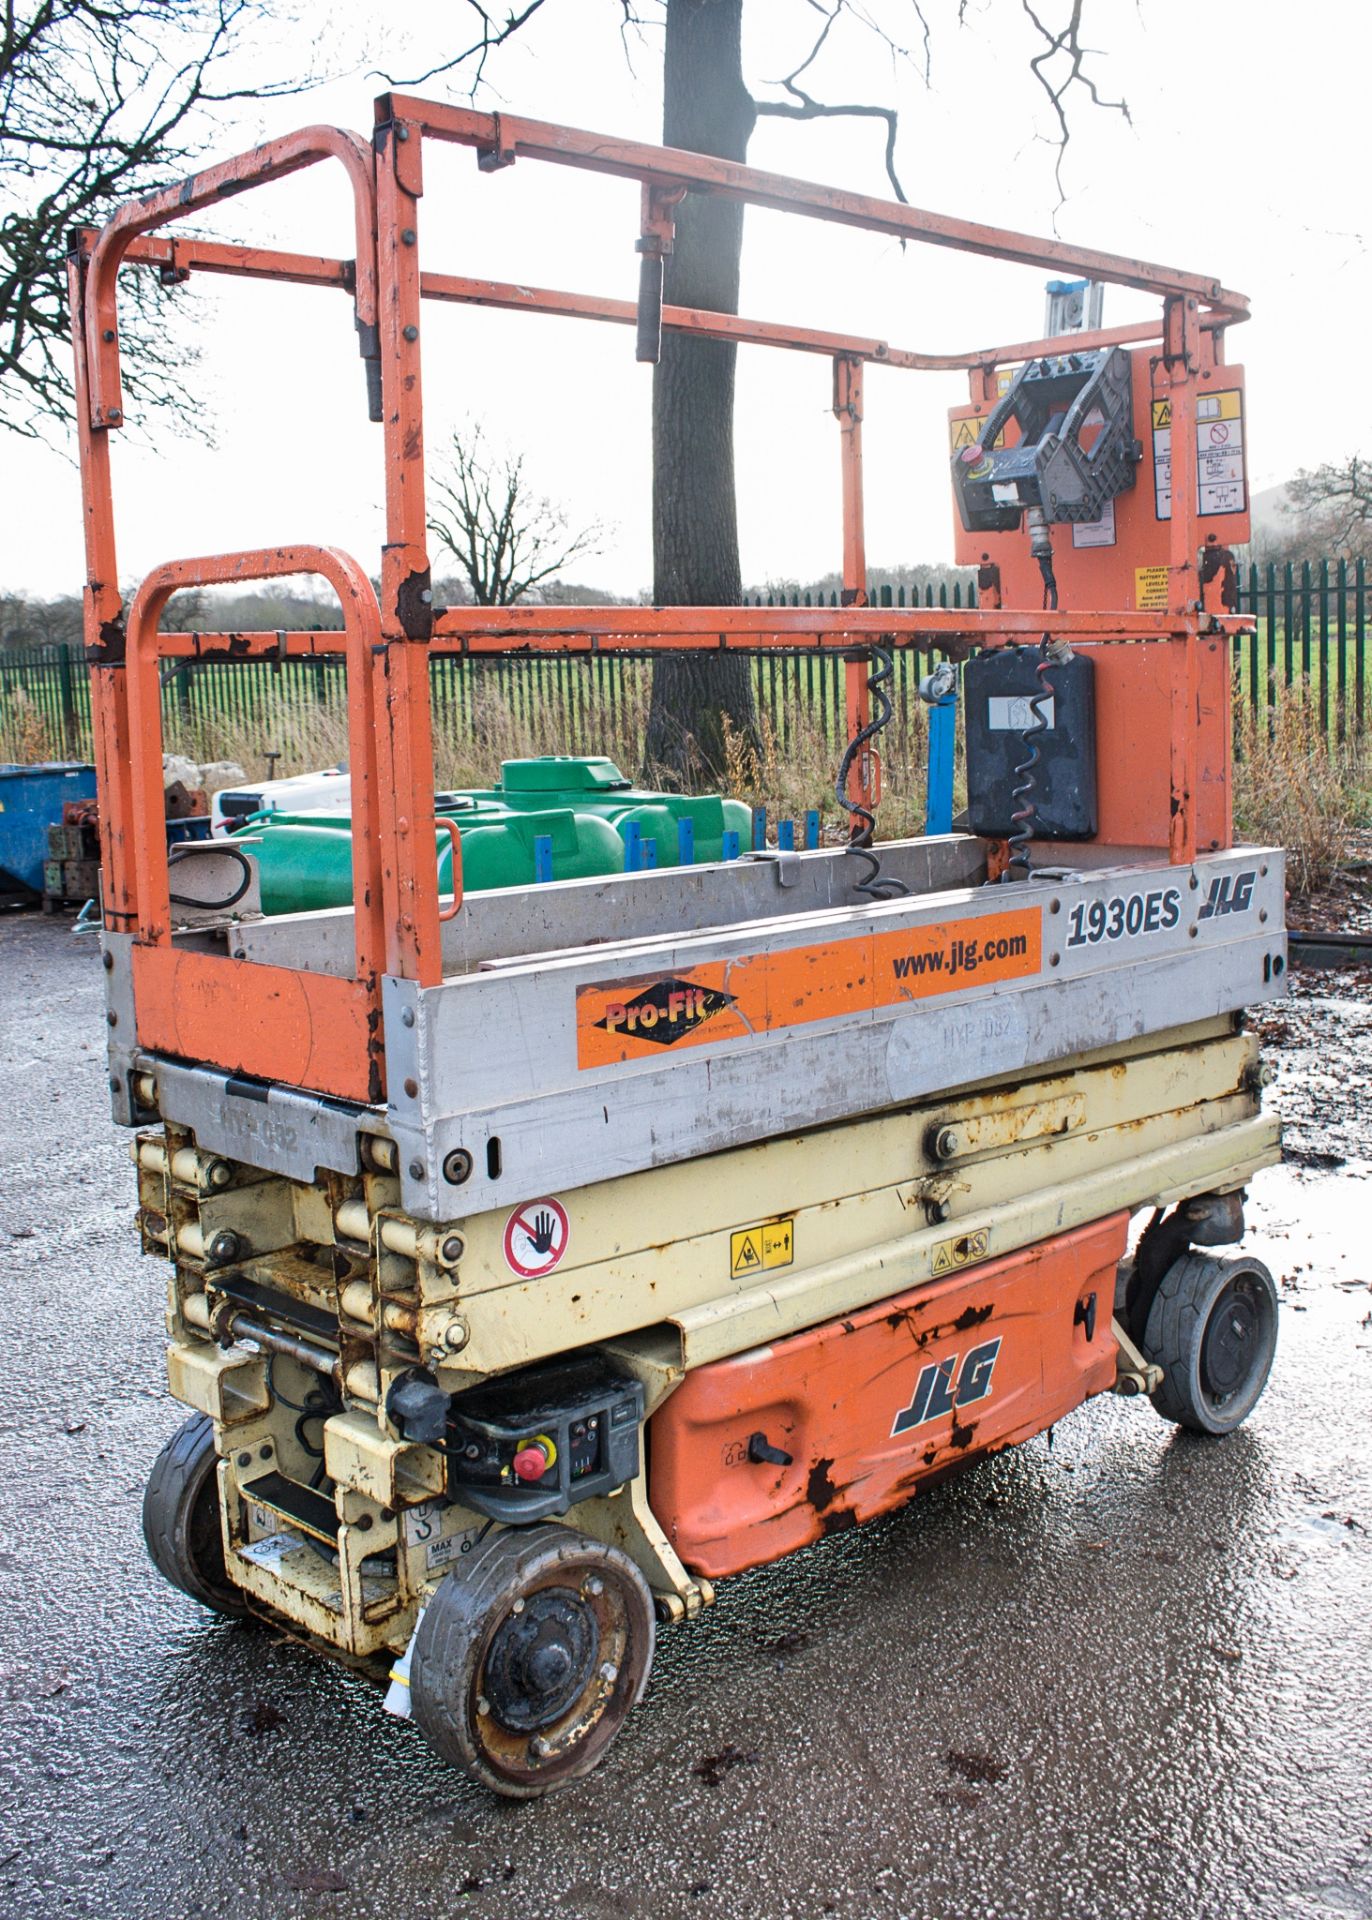 JLG 1930 ES battery electric scissor lift access platform Year: 2002 S/N: 16295 Recorded Hours: 333